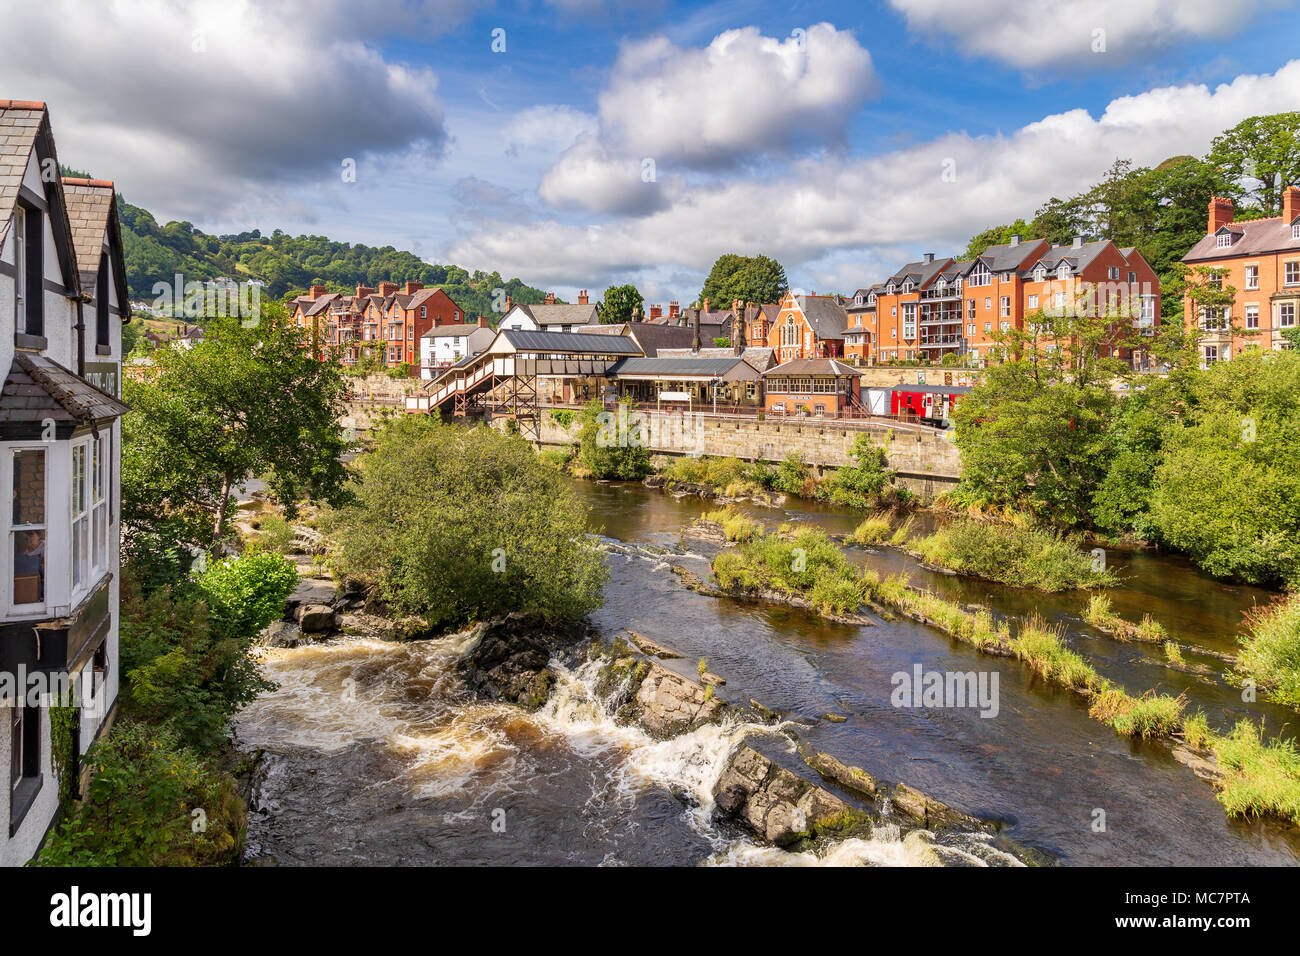 Llangollen, Denbighshire, Wales, UK - August 31, 2016: View from the Llangollen Bridge over the River Dee with the Railway Station in the background Stock Photo